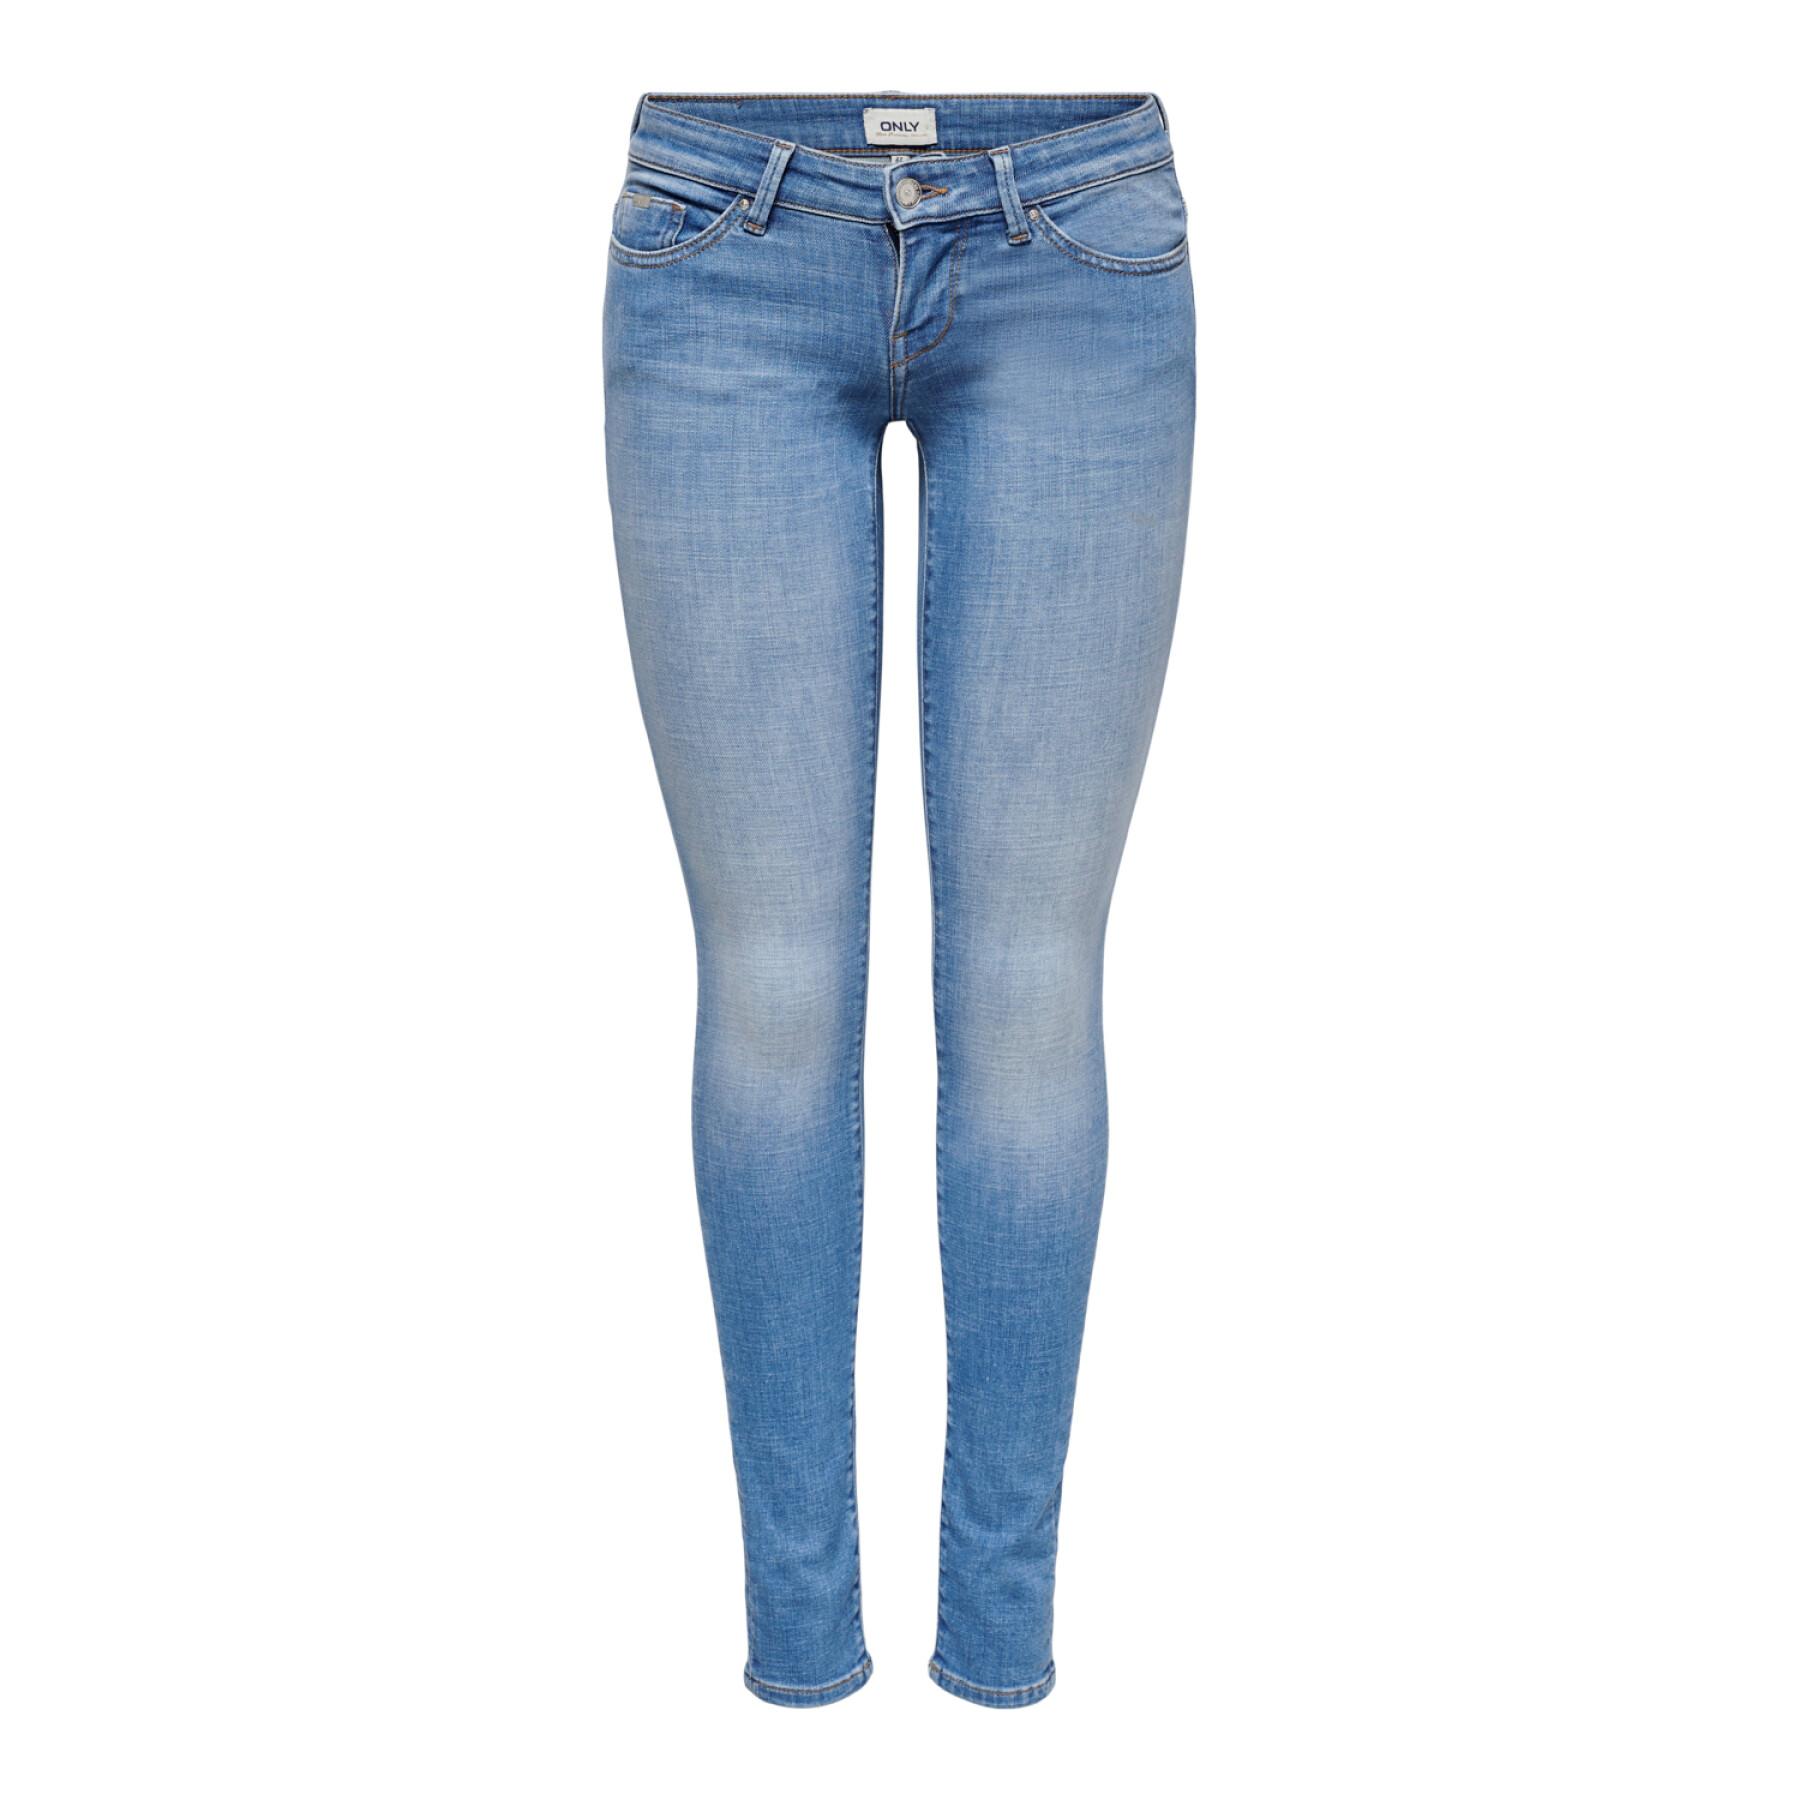 Women's skinny jeans Only onlcoral life agi387